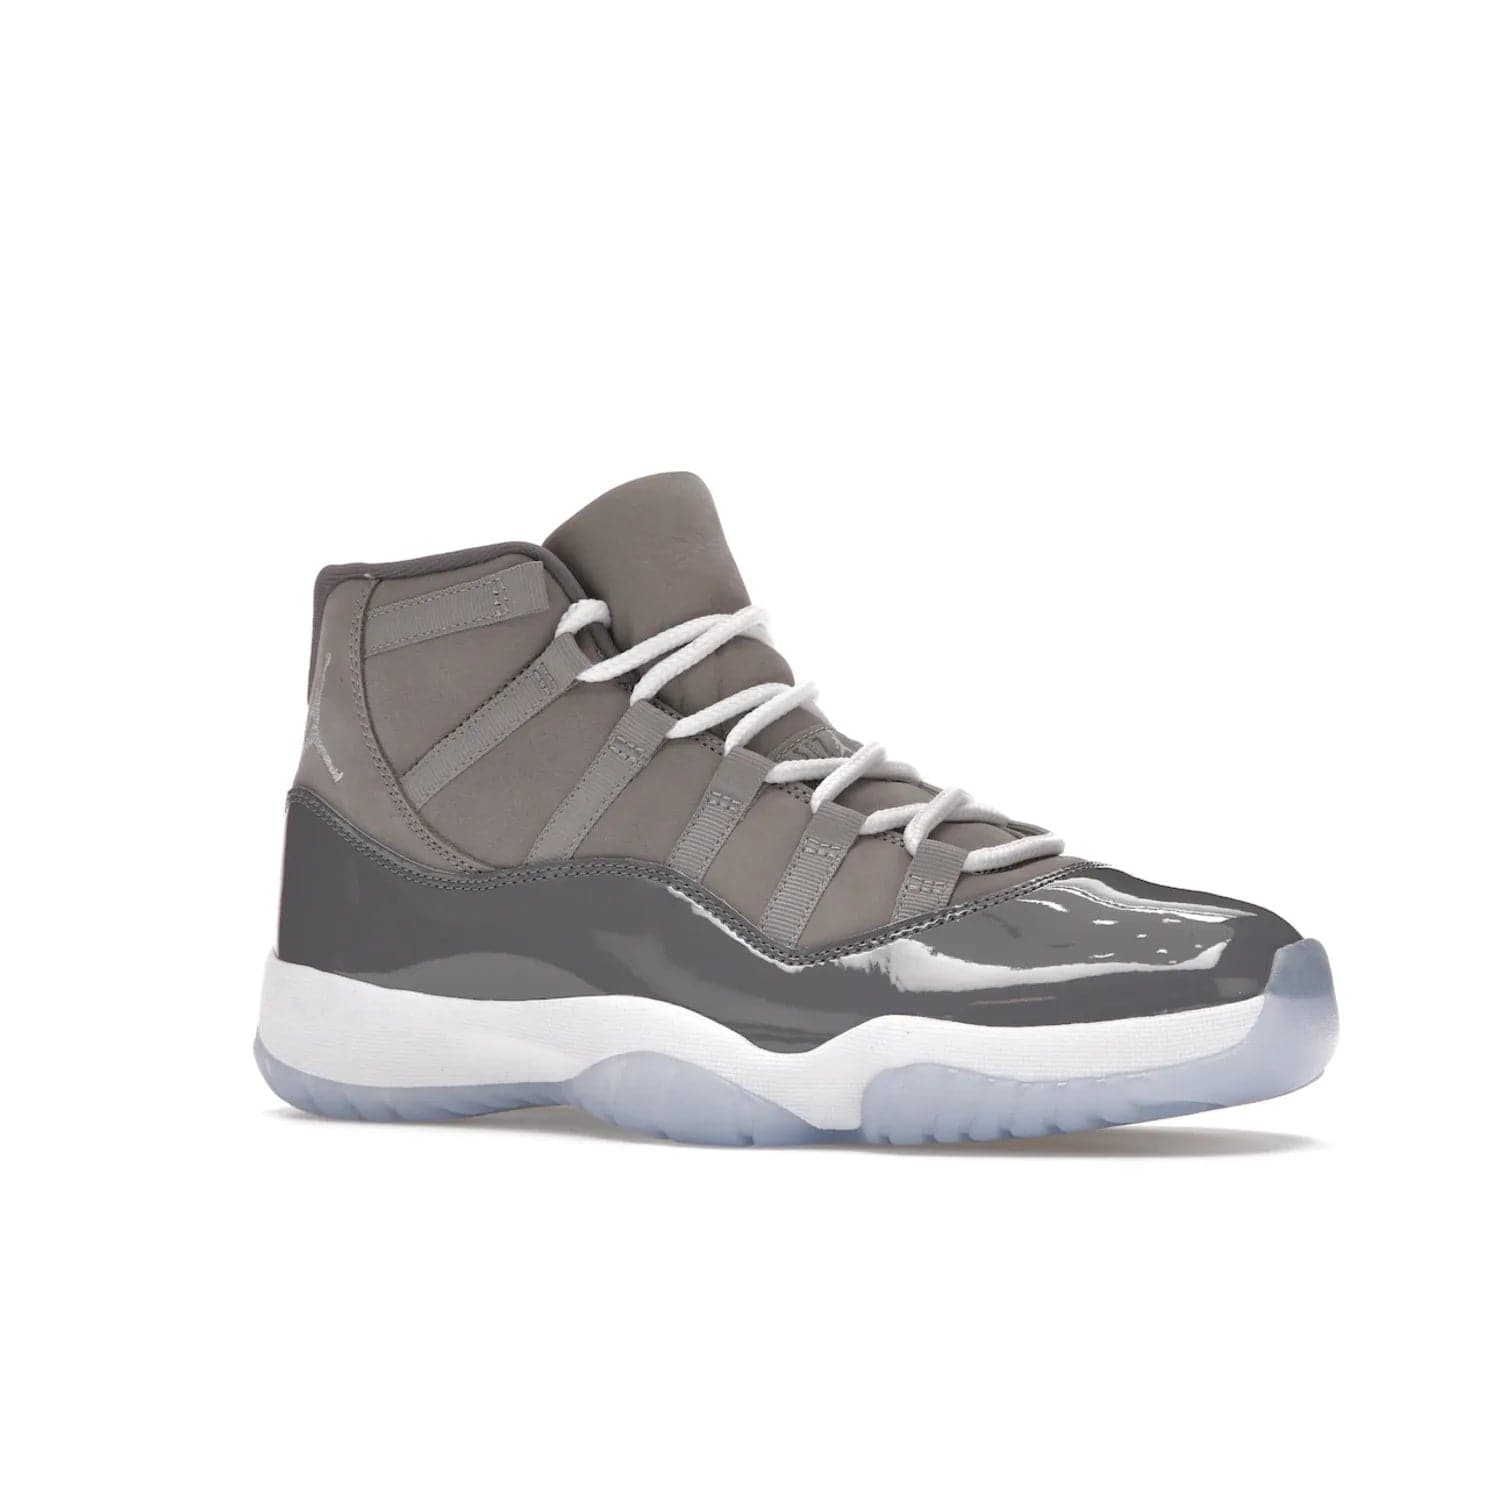 Jordan 11 Retro Cool Grey (2021) - Image 4 - Only at www.BallersClubKickz.com - Shop the Air Jordan 11 Retro Cool Grey (2021) for a must-have sneaker with a Cool Grey Durabuck upper, patent leather overlays, signature Jumpman embroidery, a white midsole, icy blue translucent outsole, and Multi-Color accents.  Released in December 2021 for $225.